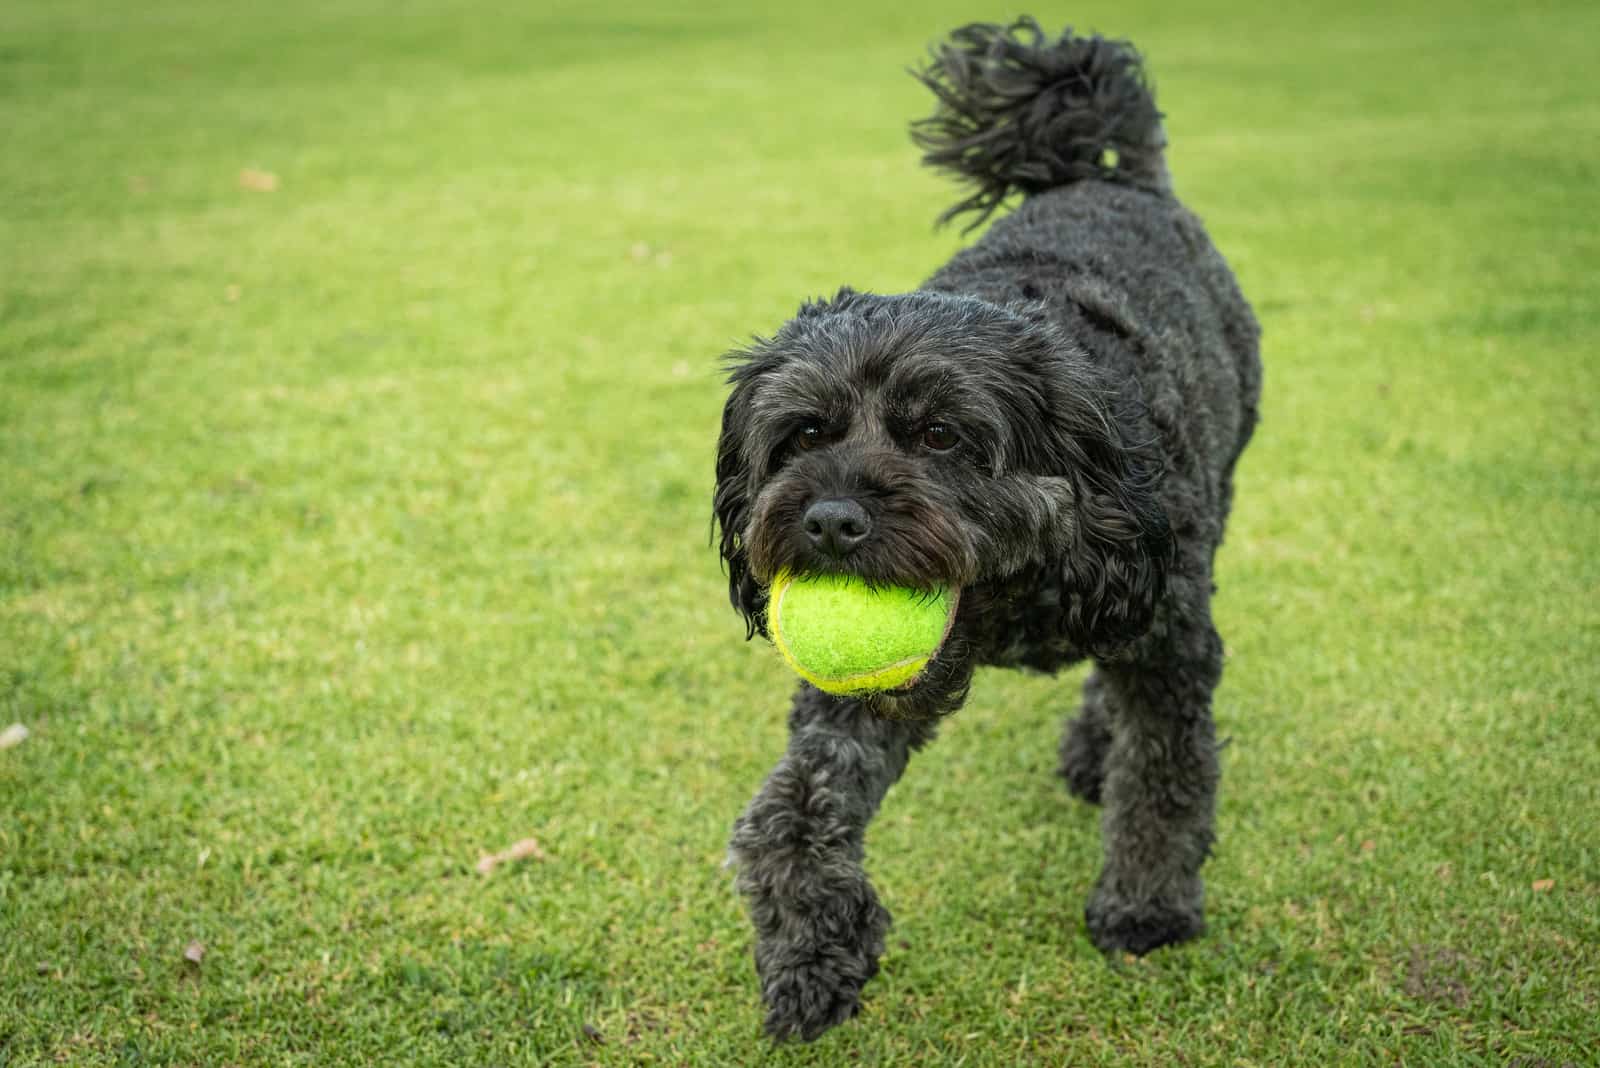 black cavapoo walking on grass with ball in mouth